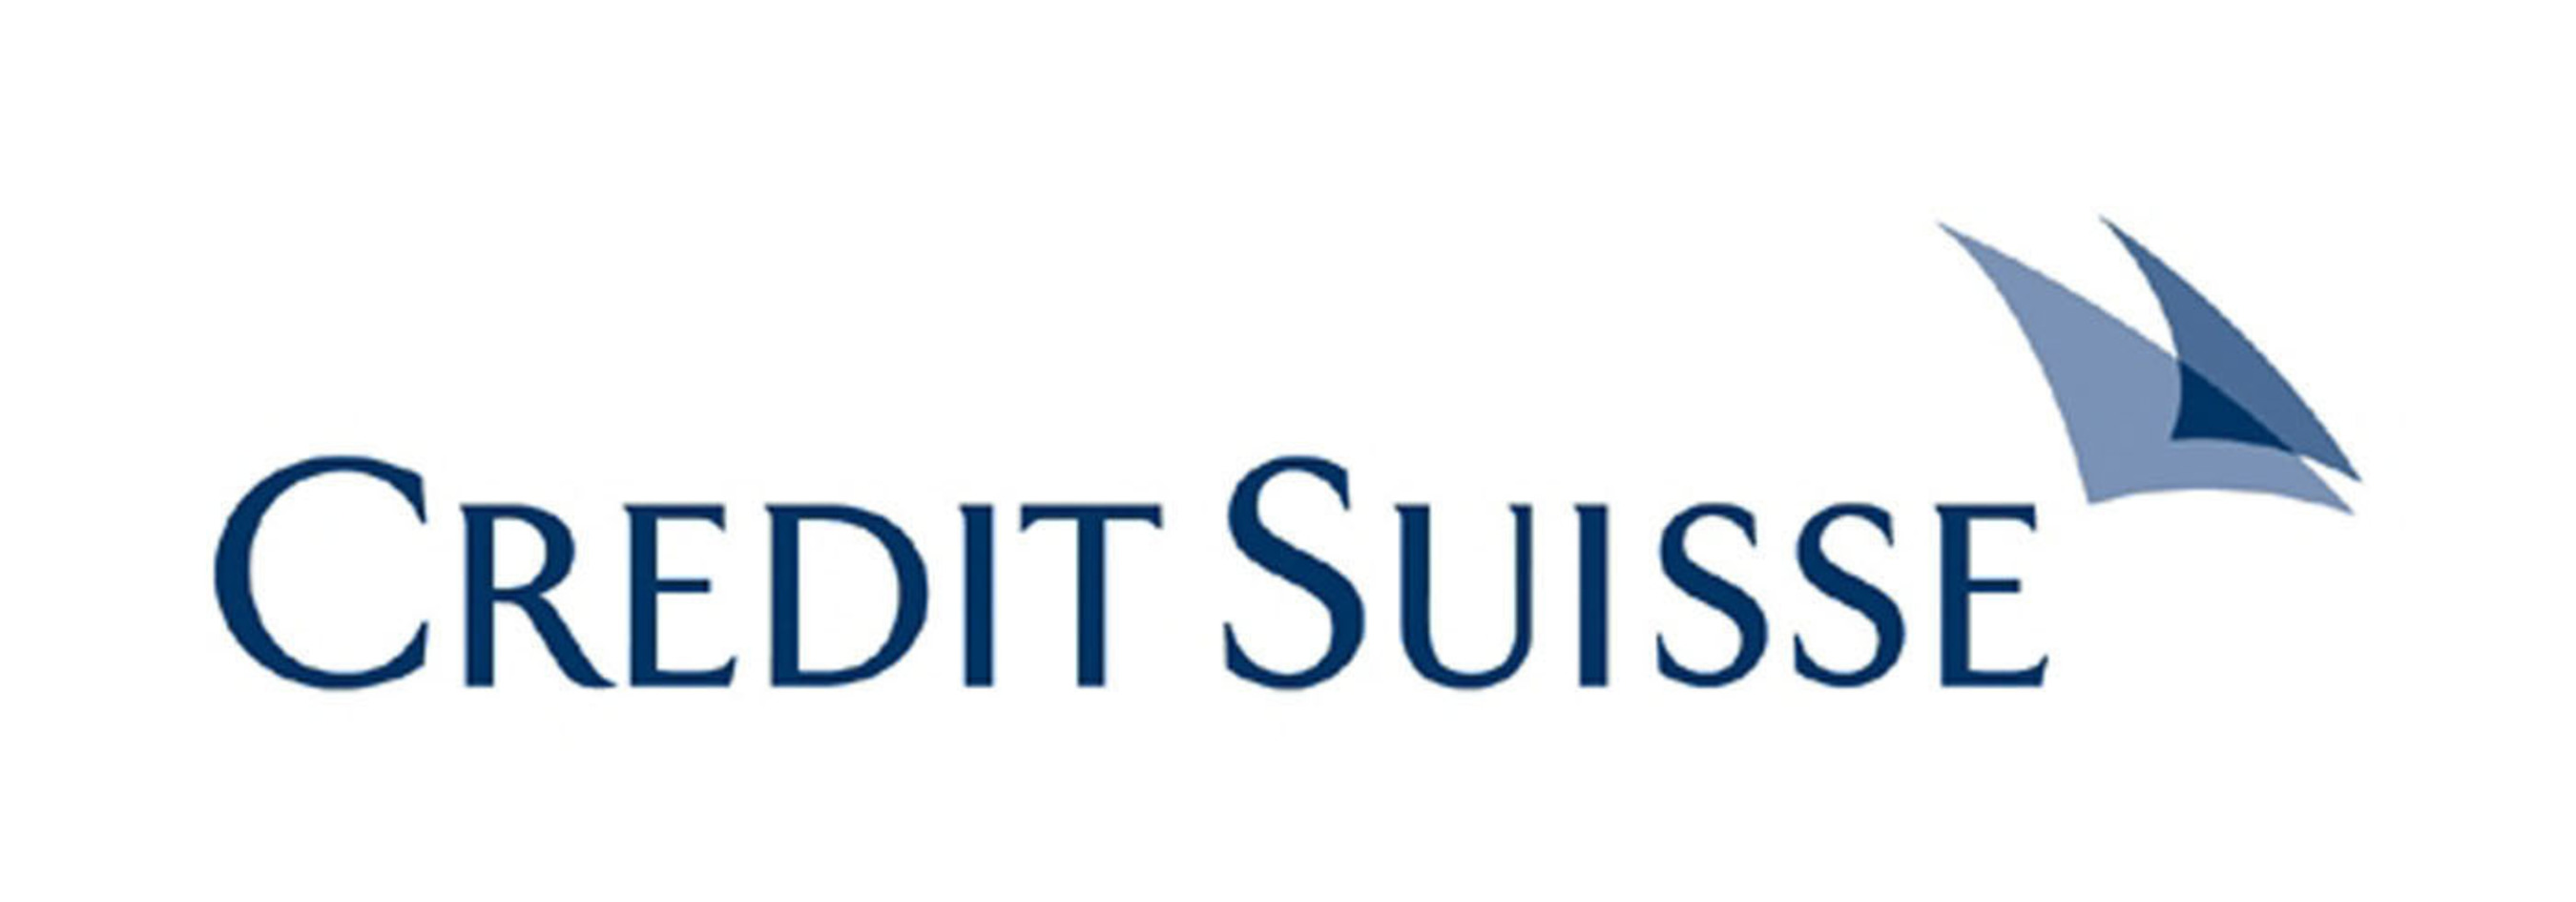 Credit Suisse Publishes Report on Evolving Consumer